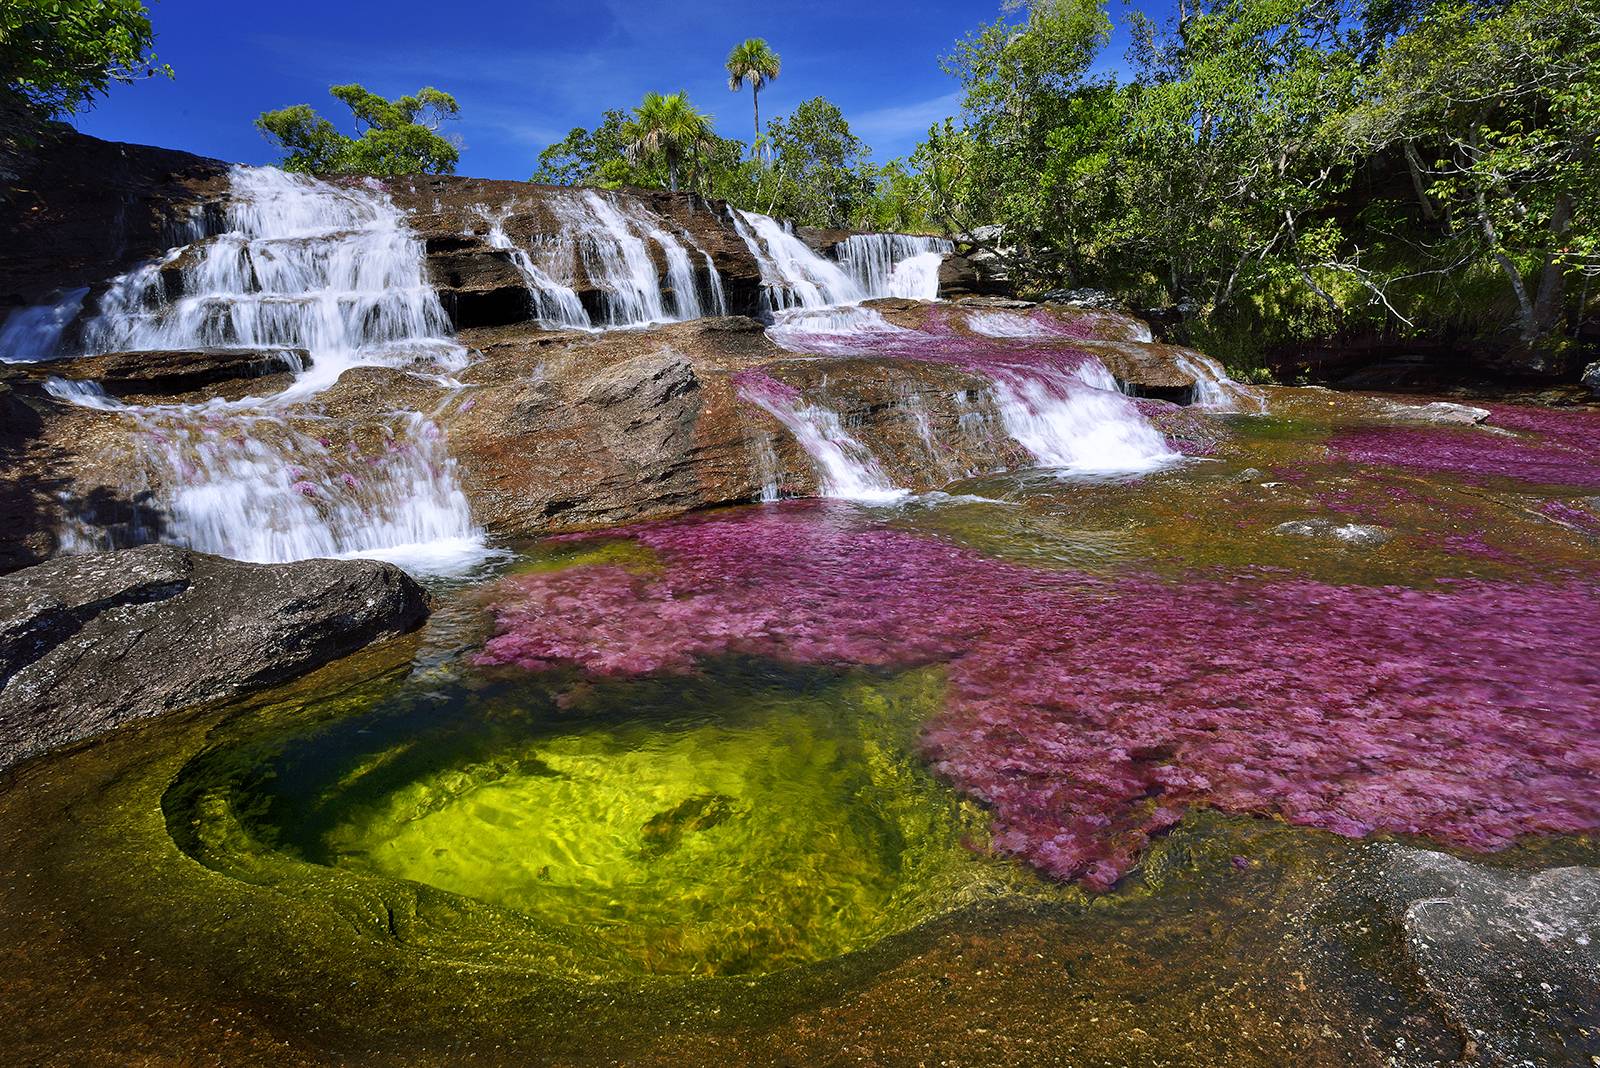 Cano Cristales colorful water